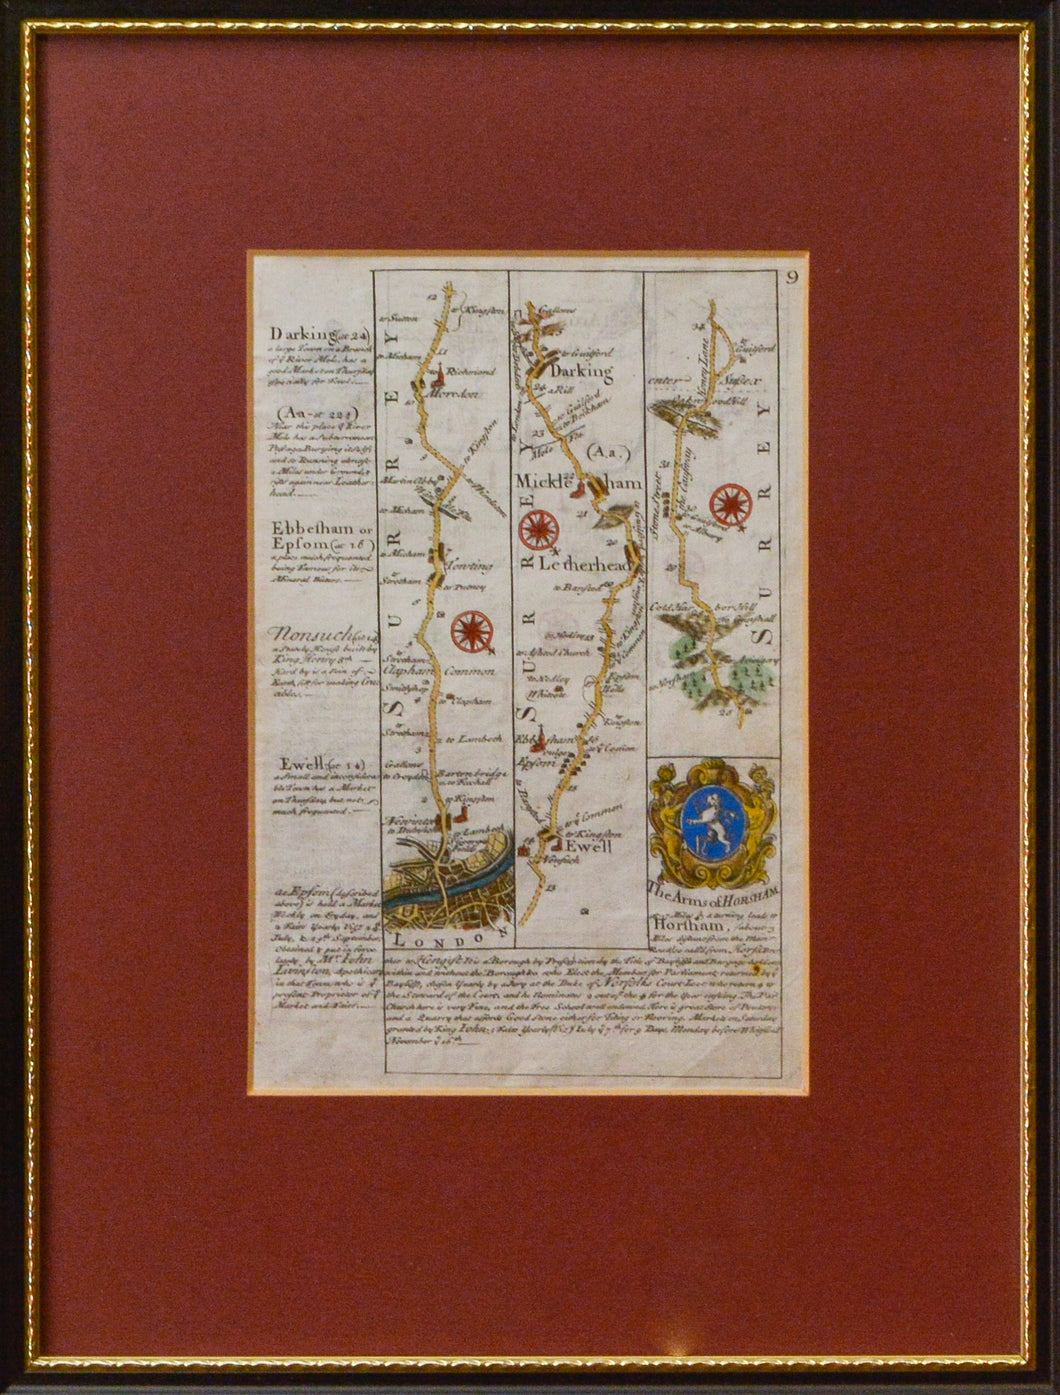 The Road from London to Chichester - Antique Route Map circa 1720